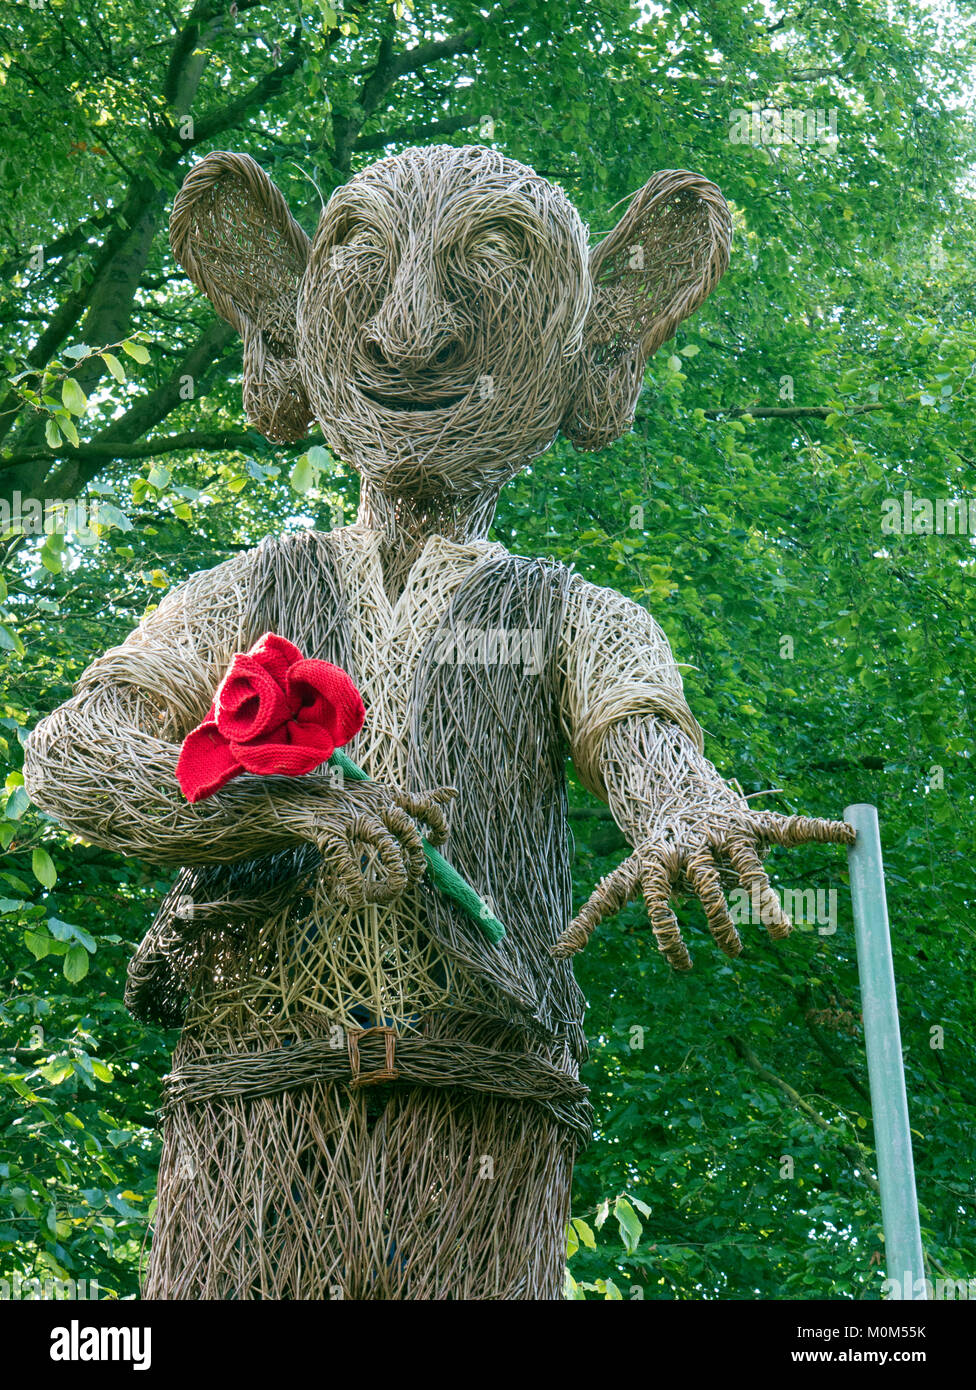 Willow sculpture of BFG (big friendly giant) ,holding a knitted red rose, at RHS garden Harlow Carr, Yorkshire Stock Photo